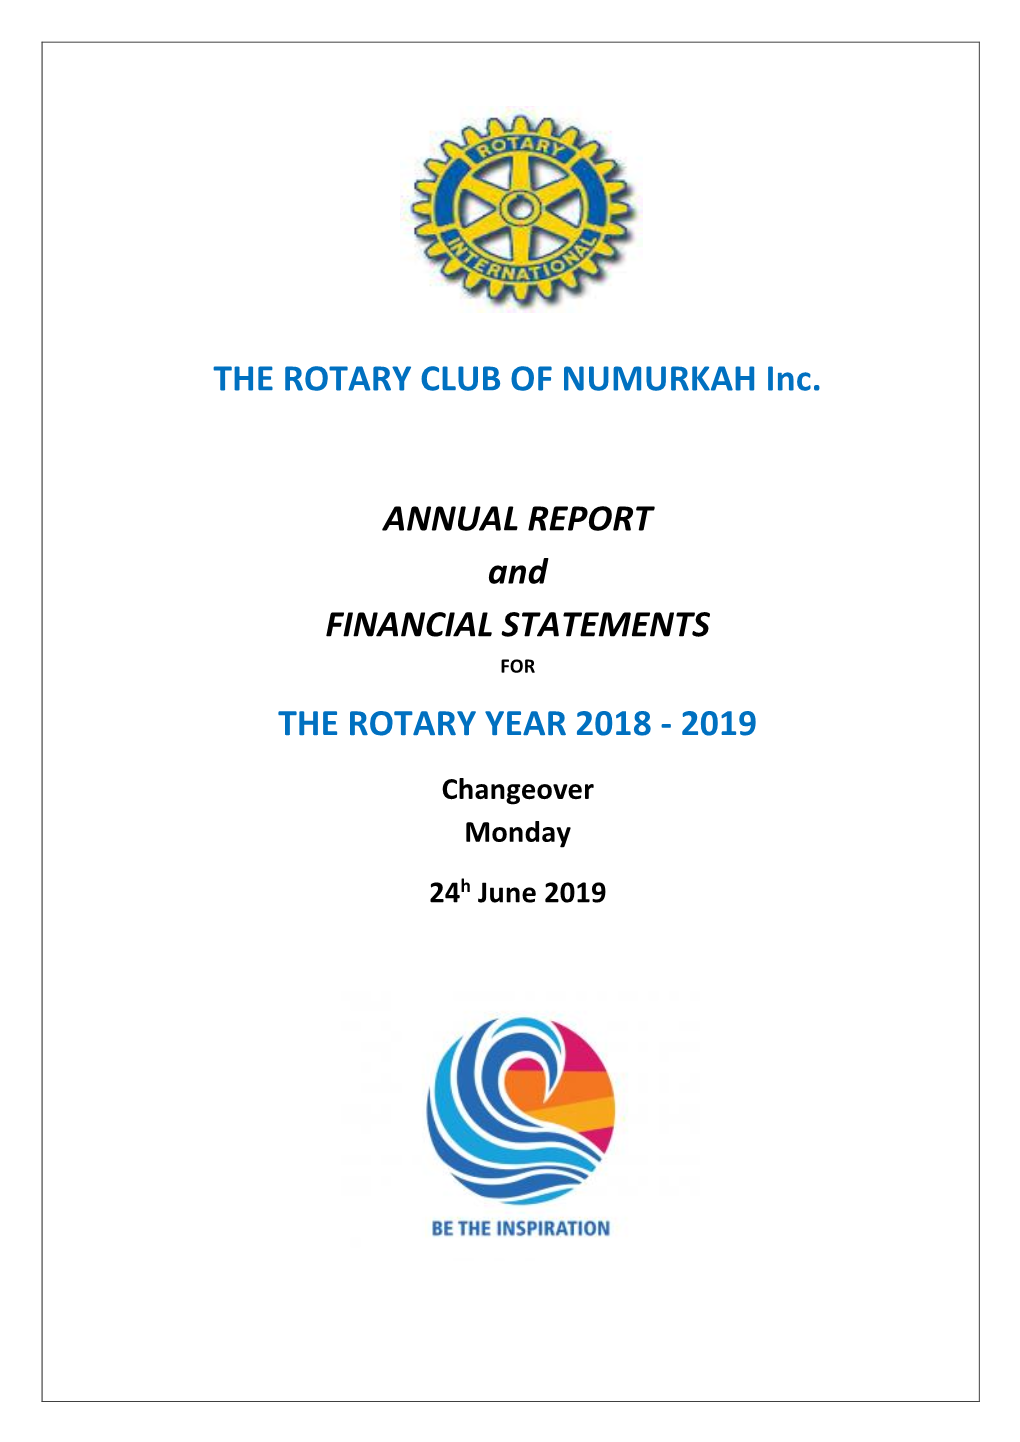 THE ROTARY CLUB of NUMURKAH Inc. ANNUAL REPORT And